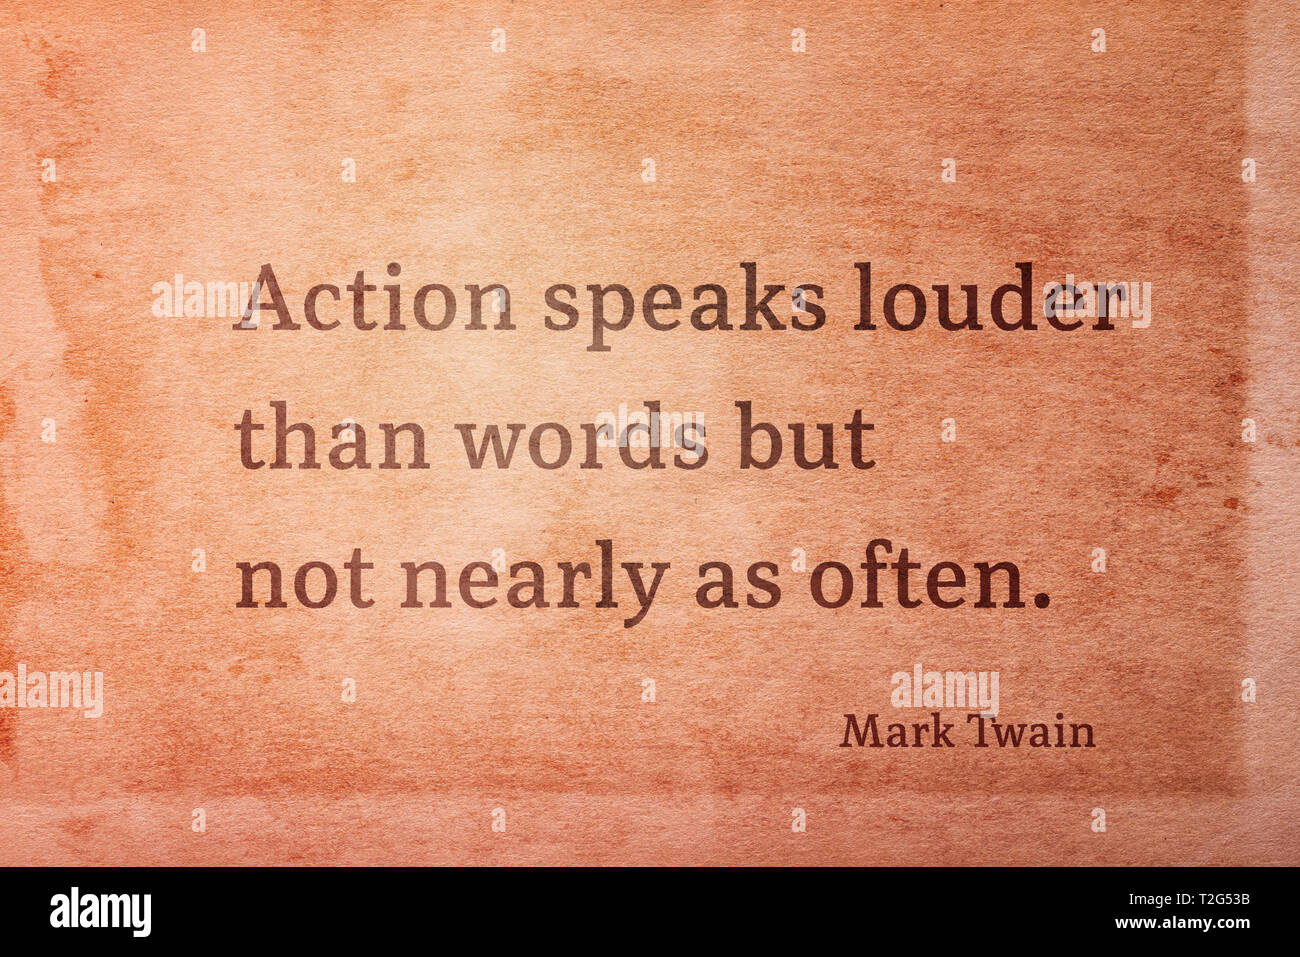 Action speaks louder than words but not nearly as often - famous American writer Mark Twain quote printed on vintage grunge paper Stock Photo